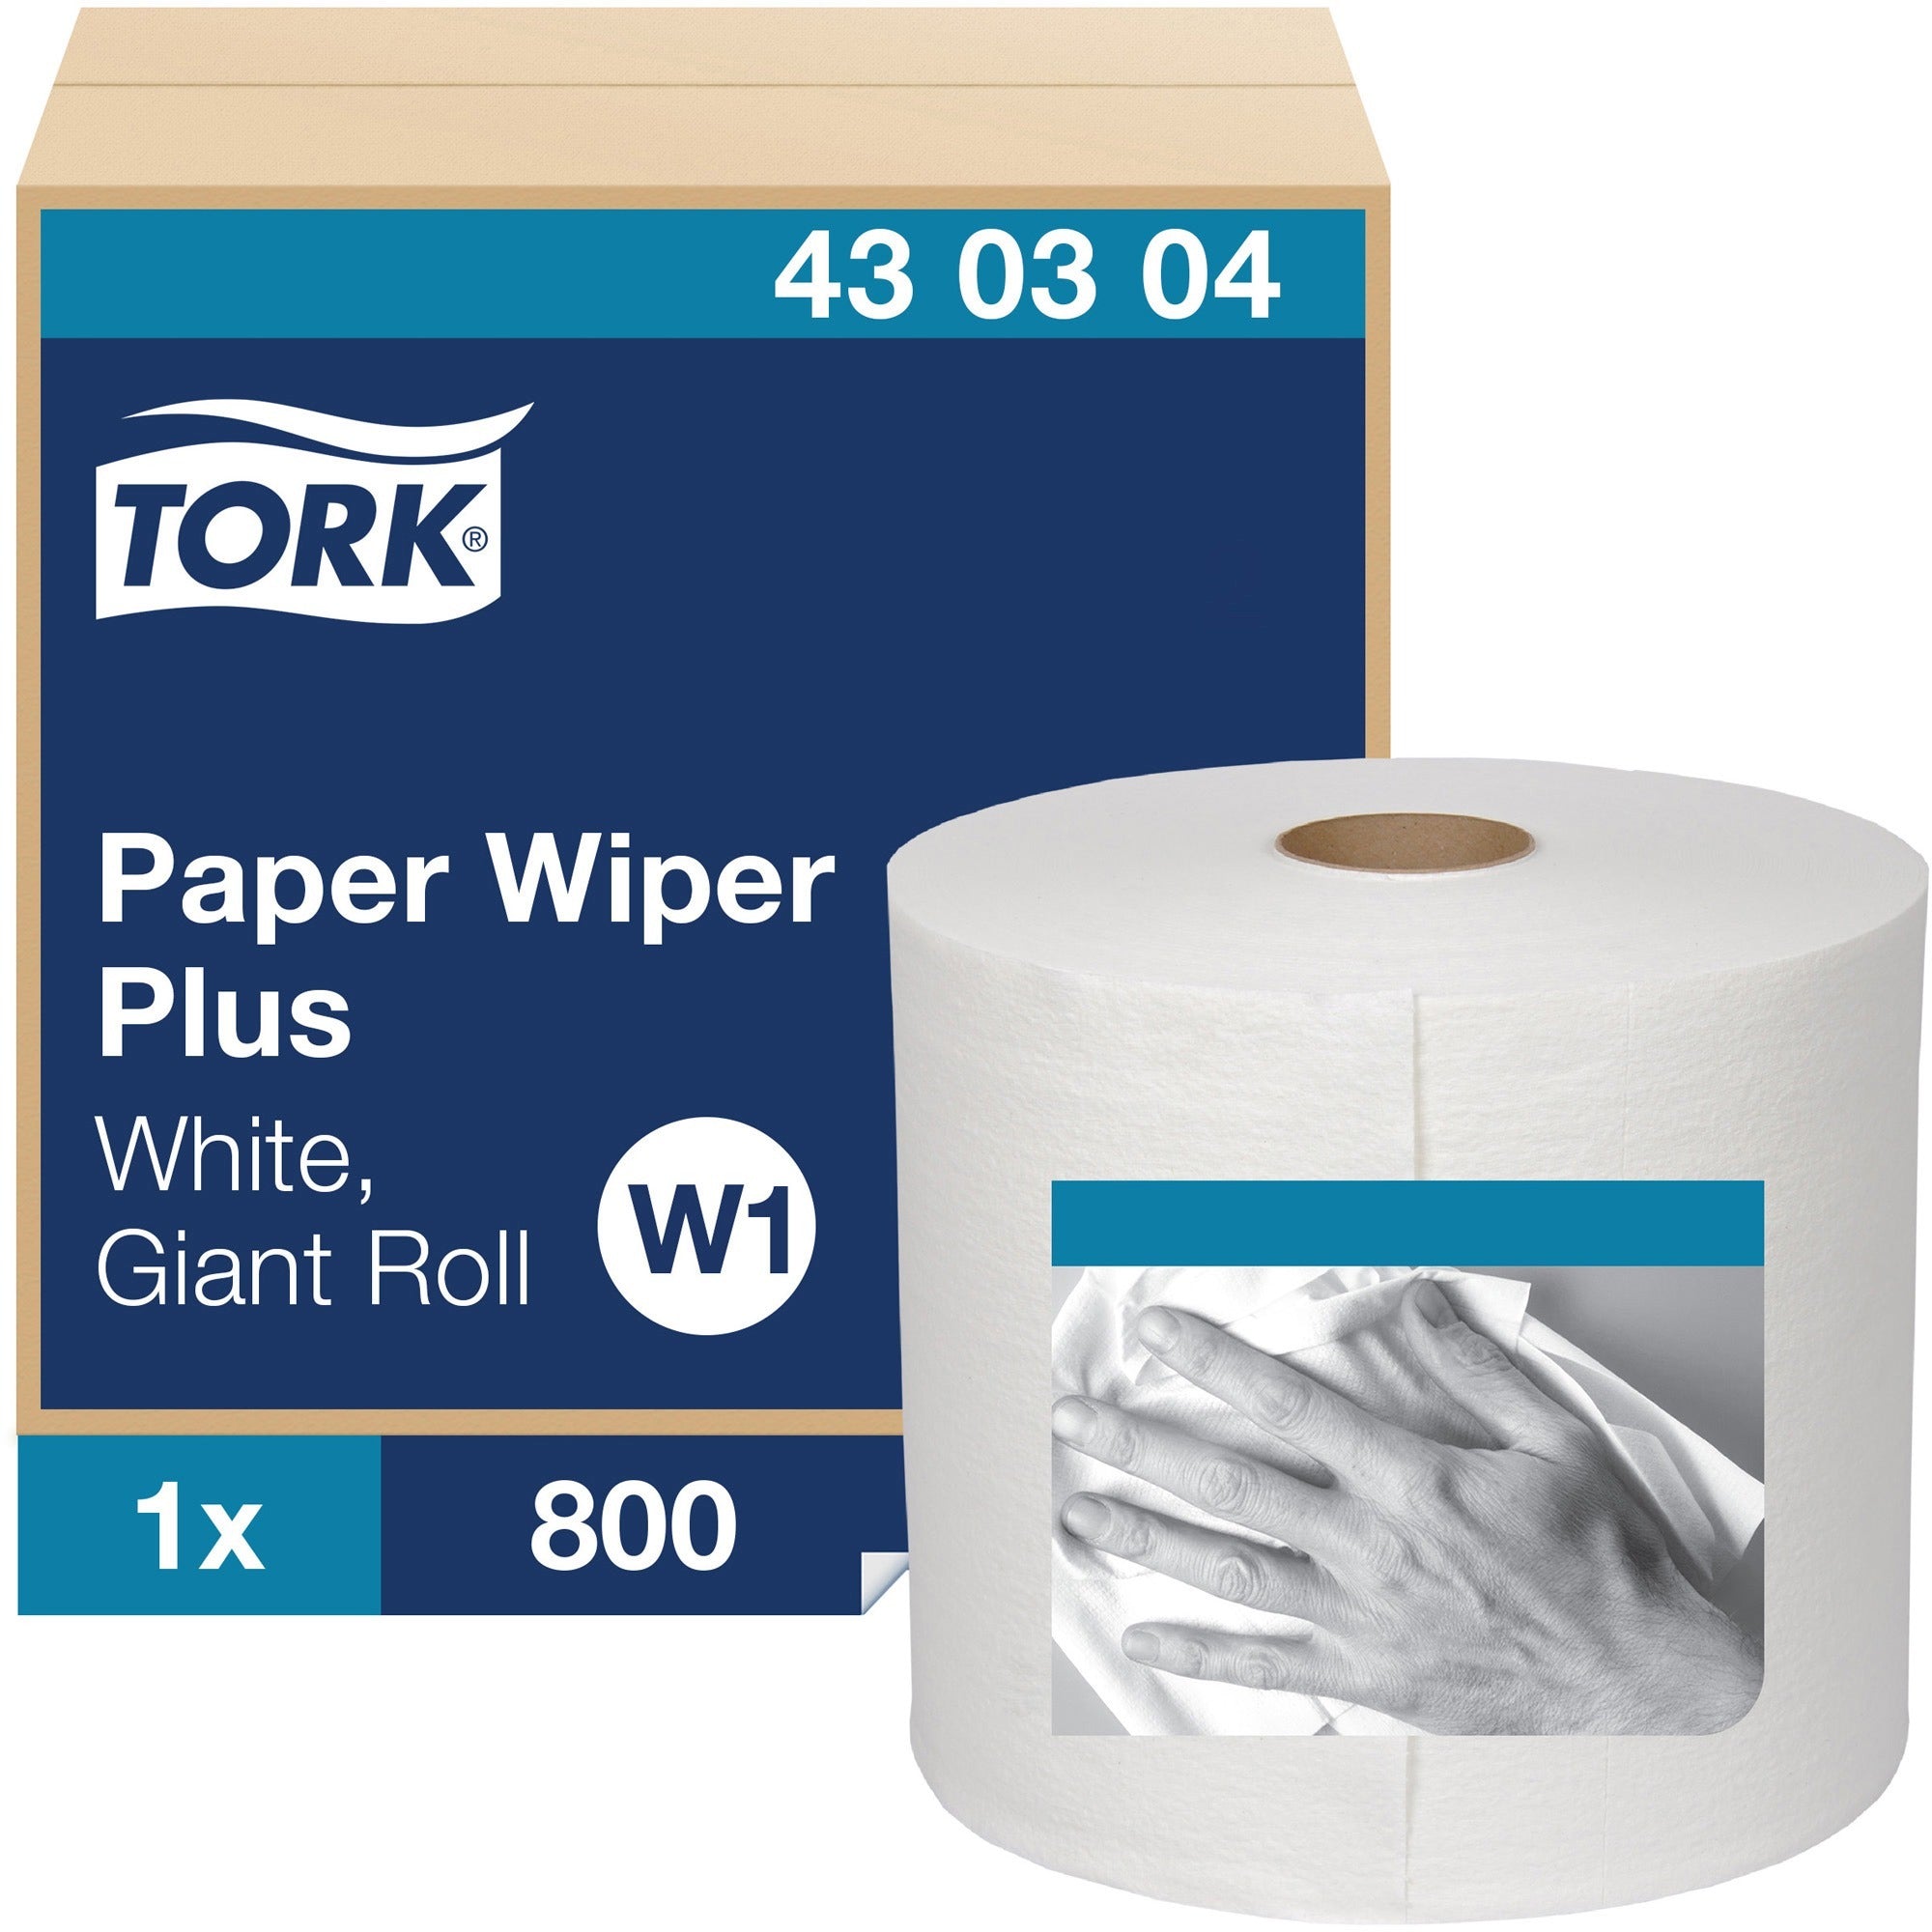 tork-paper-wiper-plus-1-ply-800-sheets-roll-1225-roll-diameter-3-core-white-strong-absorbent-easy-tear-durable-reusable-textured-lint-free-streak-free-for-multipurpose-1-carton_trk430304 - 1